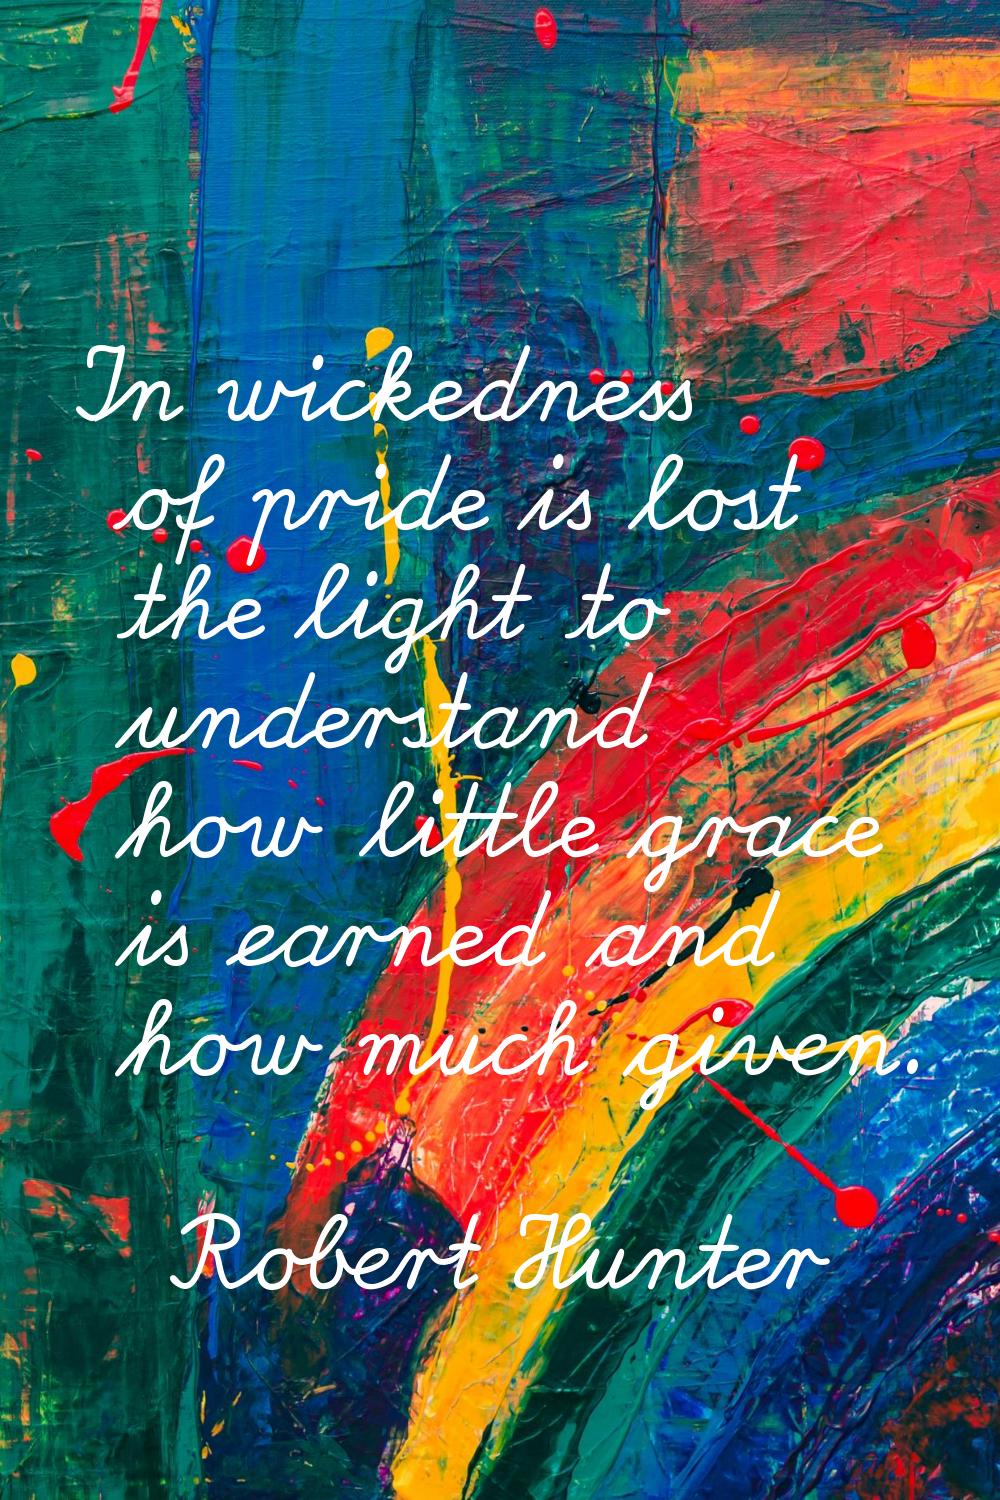 In wickedness of pride is lost the light to understand how little grace is earned and how much give